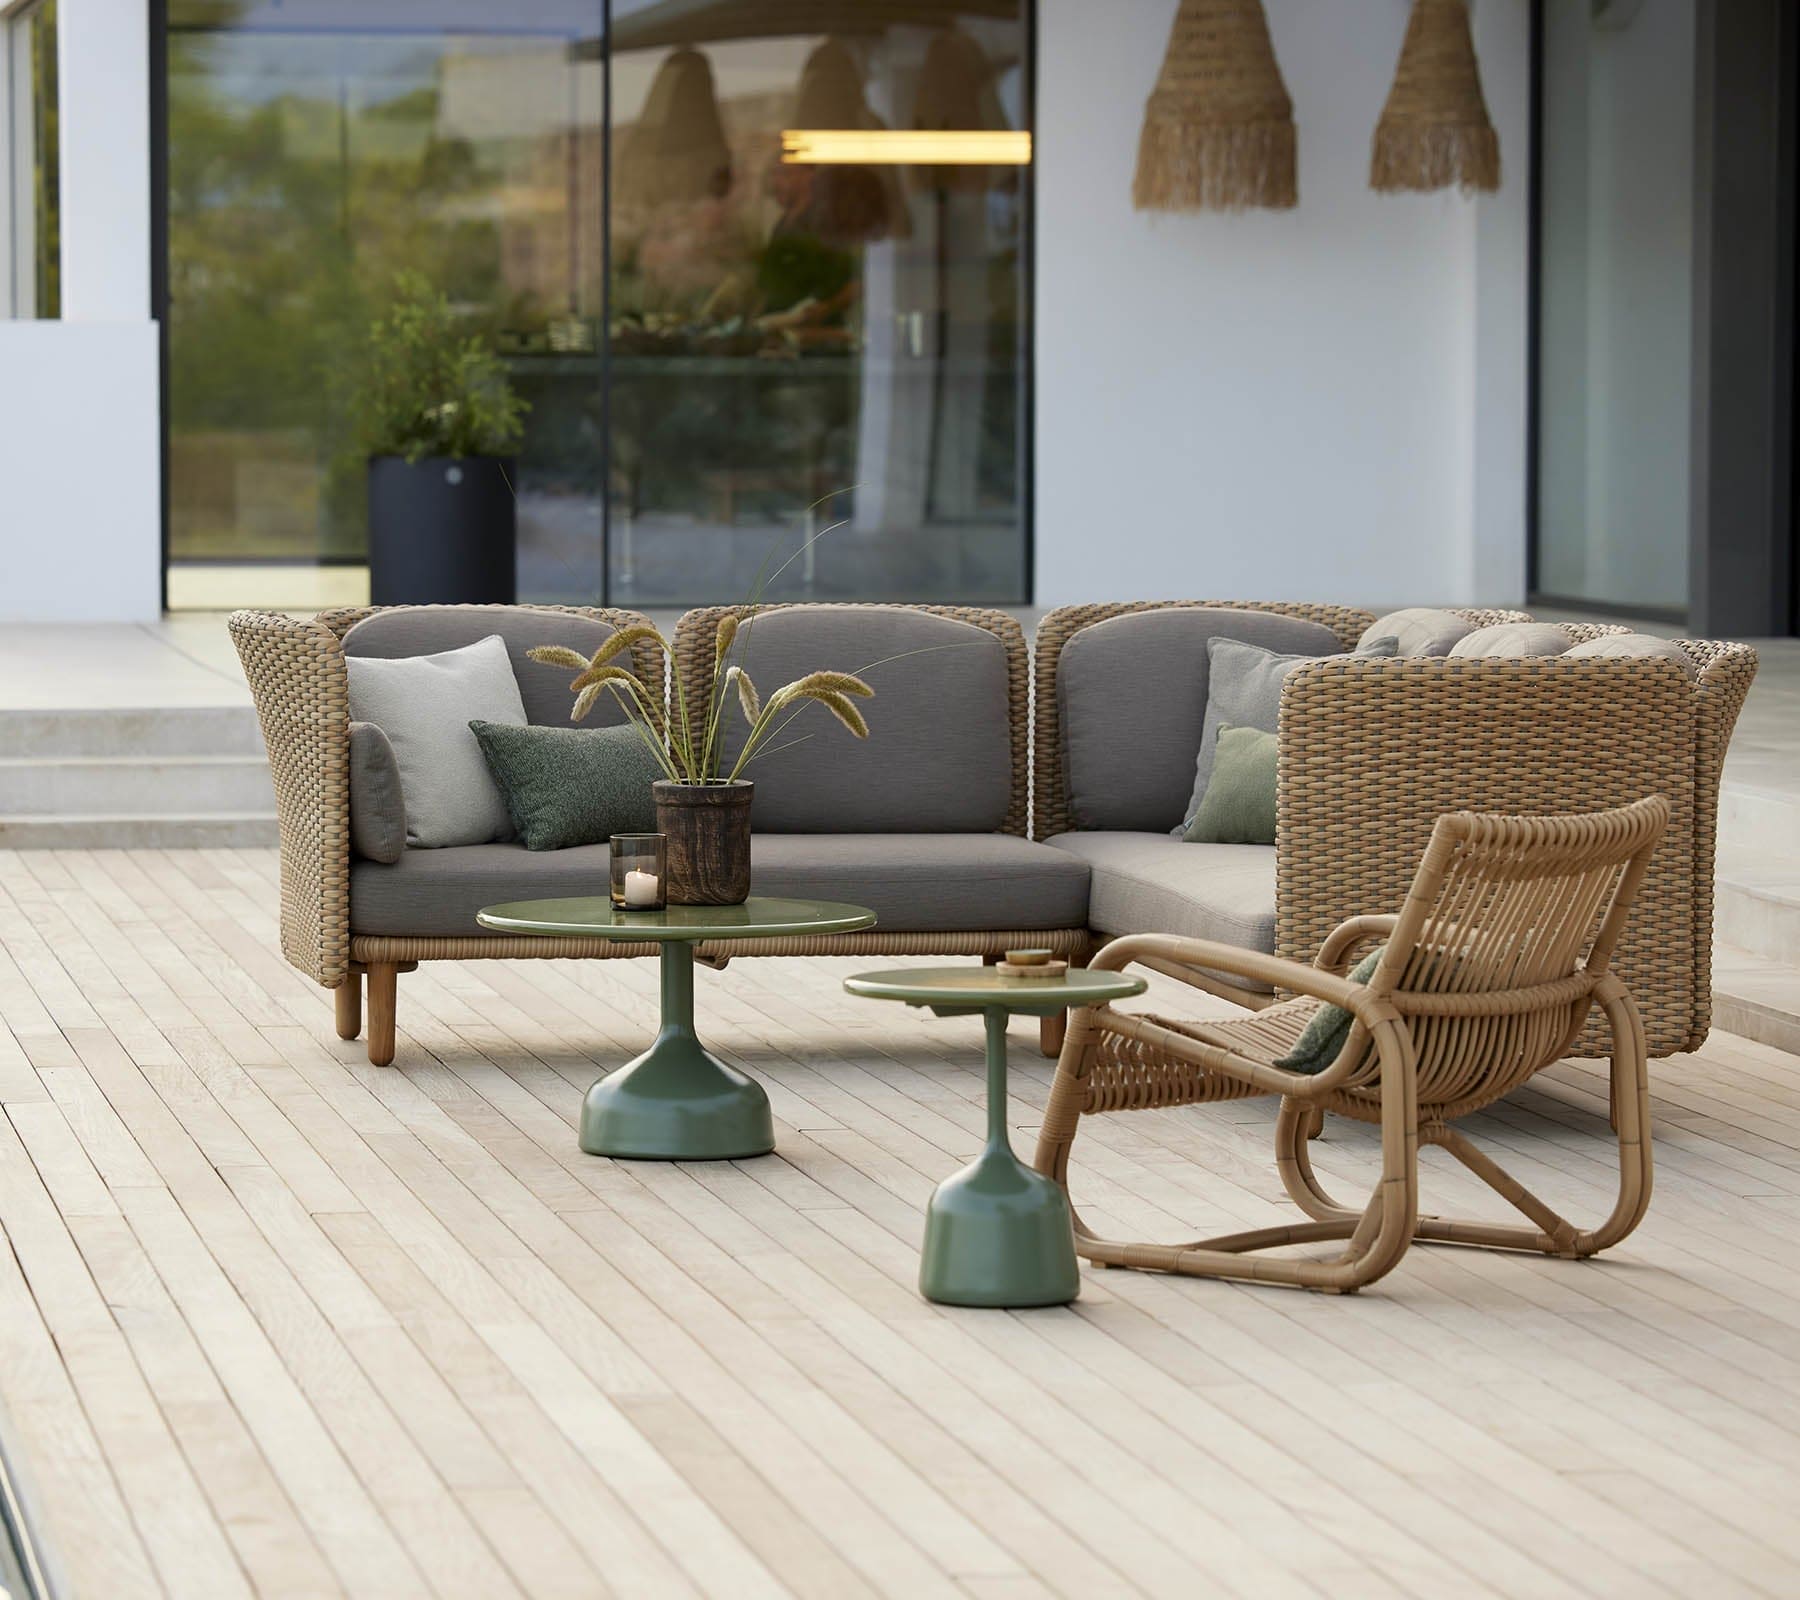 Boxhill's Glaze Outdoor Round Coffee Table lifestyle image with module sofa on wooden platform at patio 